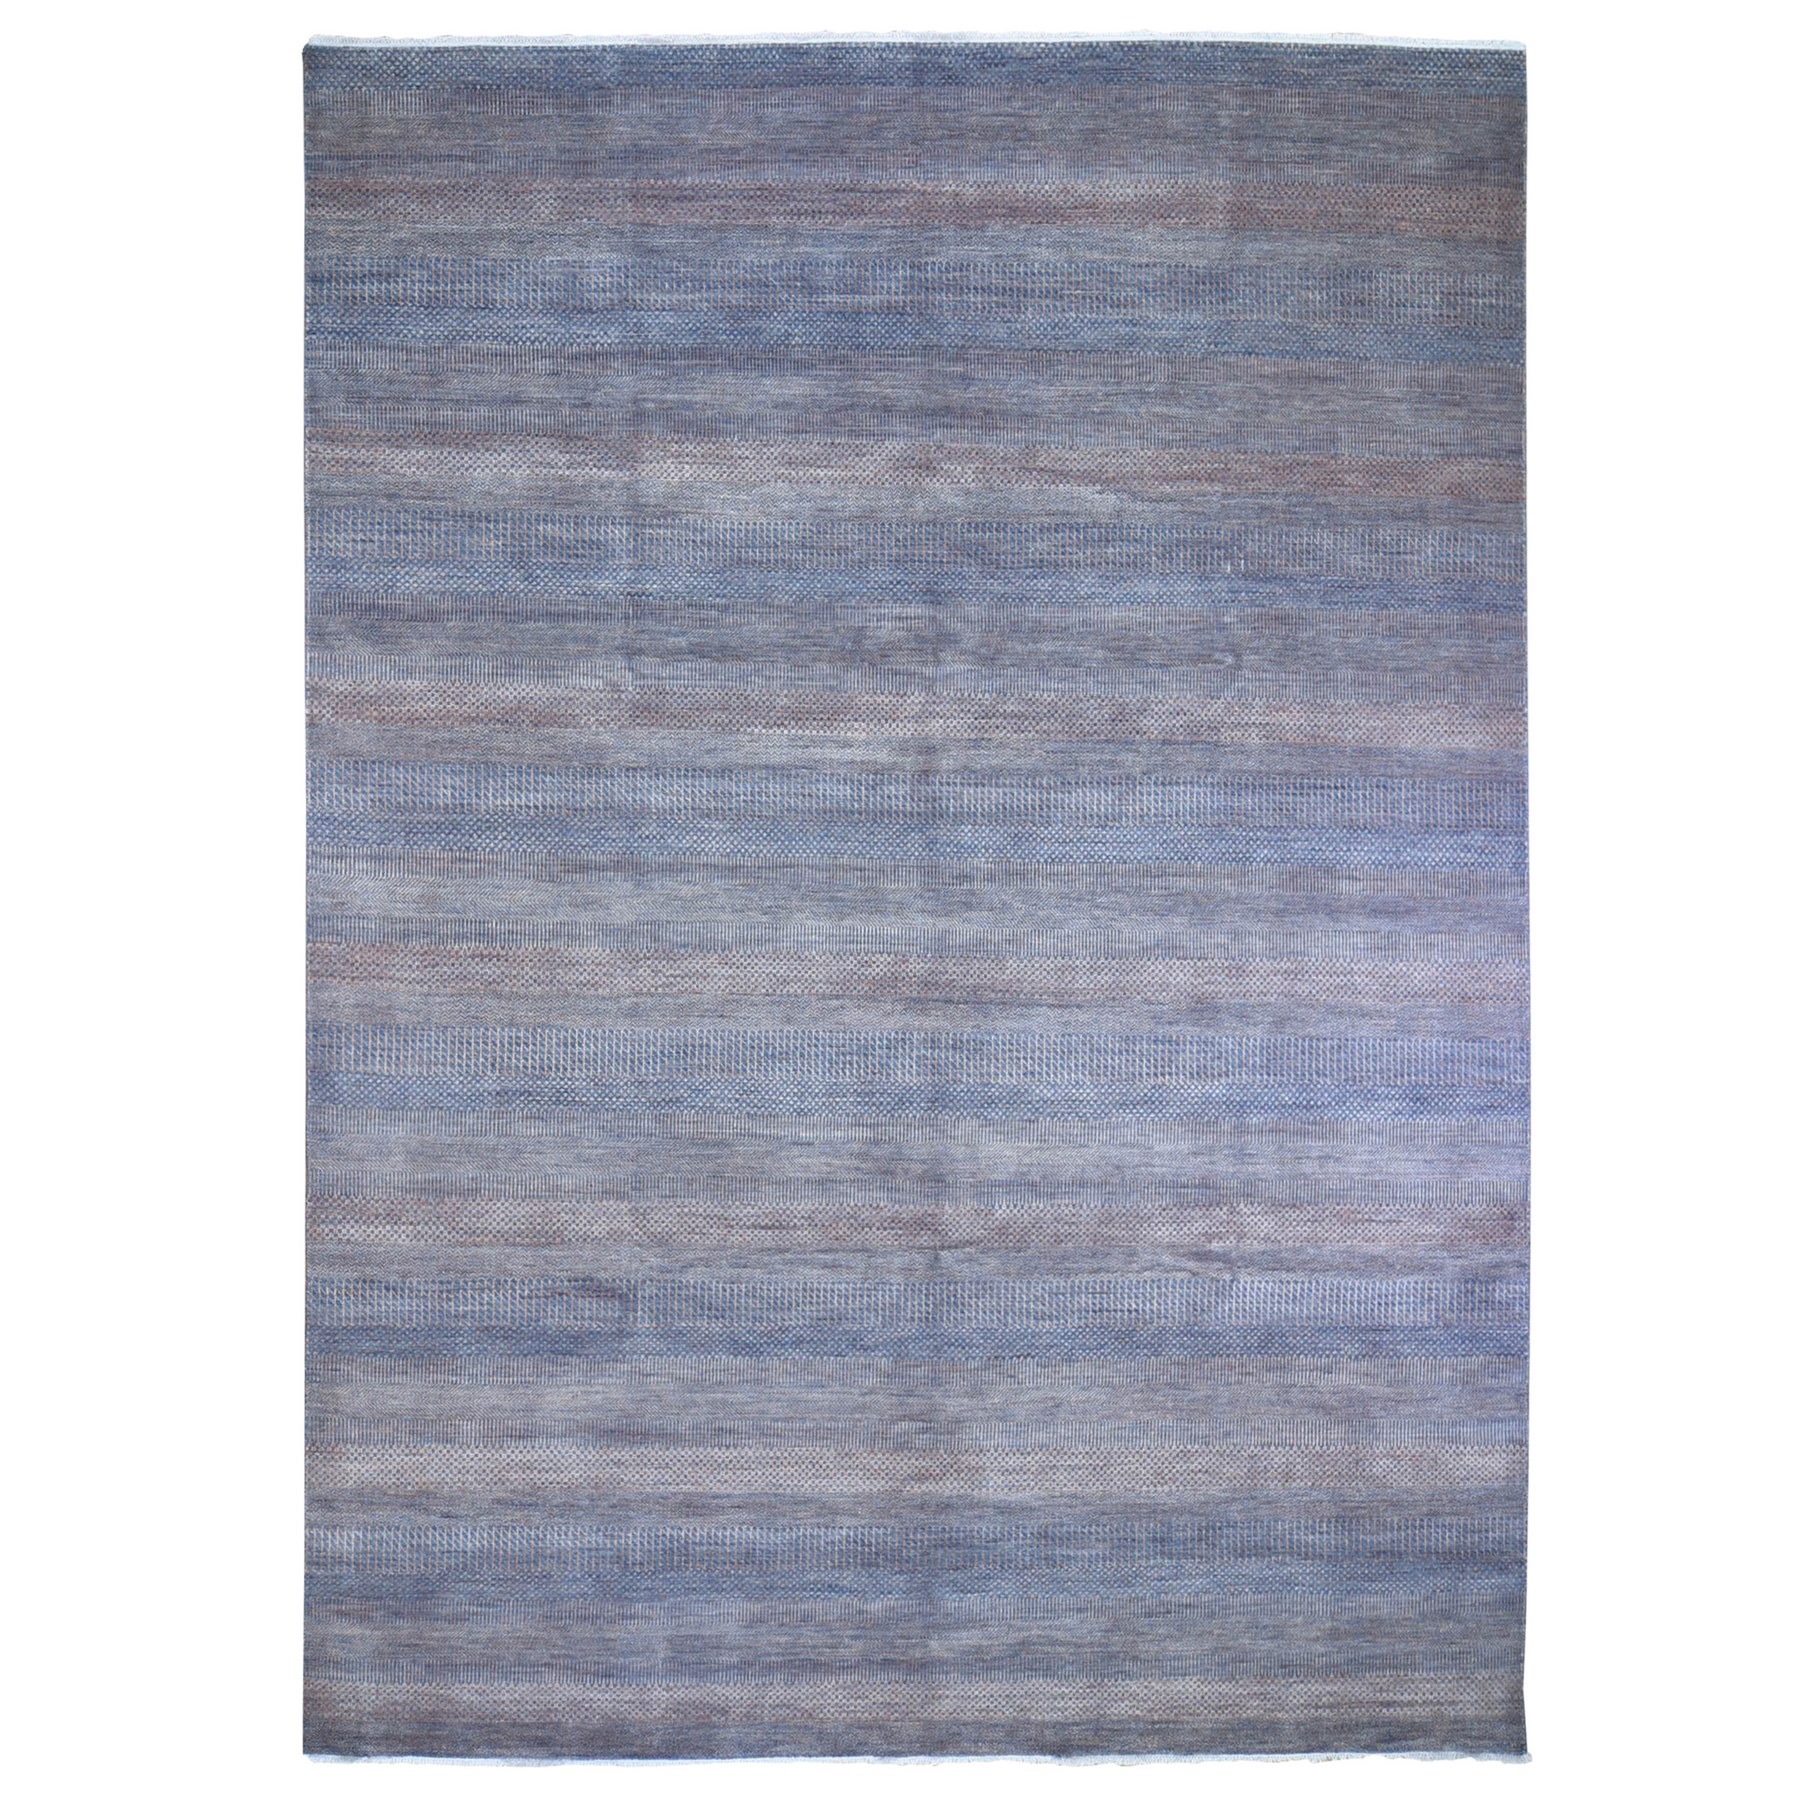 KNOTTED | Couture Rugs Proprietary Patterns Southwestern Hand-Knotted Wool  Area Rug in Heron Denim | Perigold